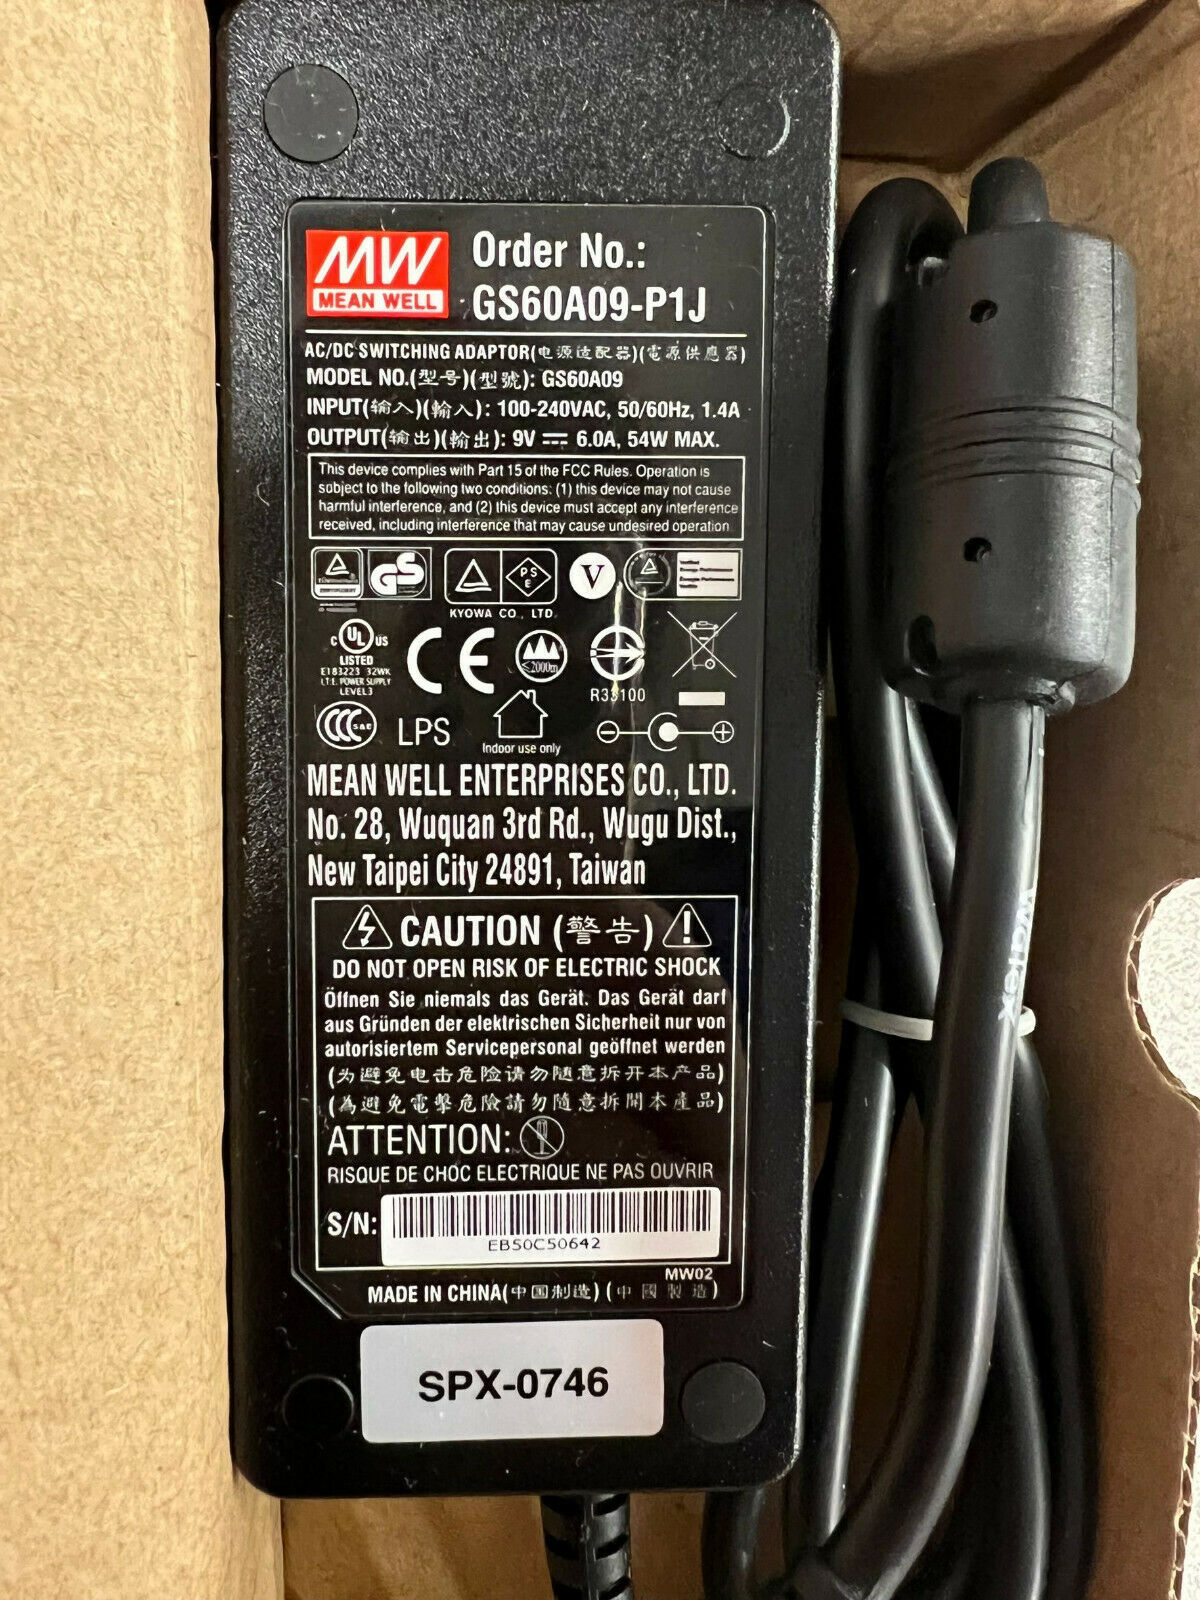 Original MW Mean Well GS60A09-P1J 9V 6A 54W AC Adapter Power Supply Cord Charger Technical Specifications: 1 AC input v